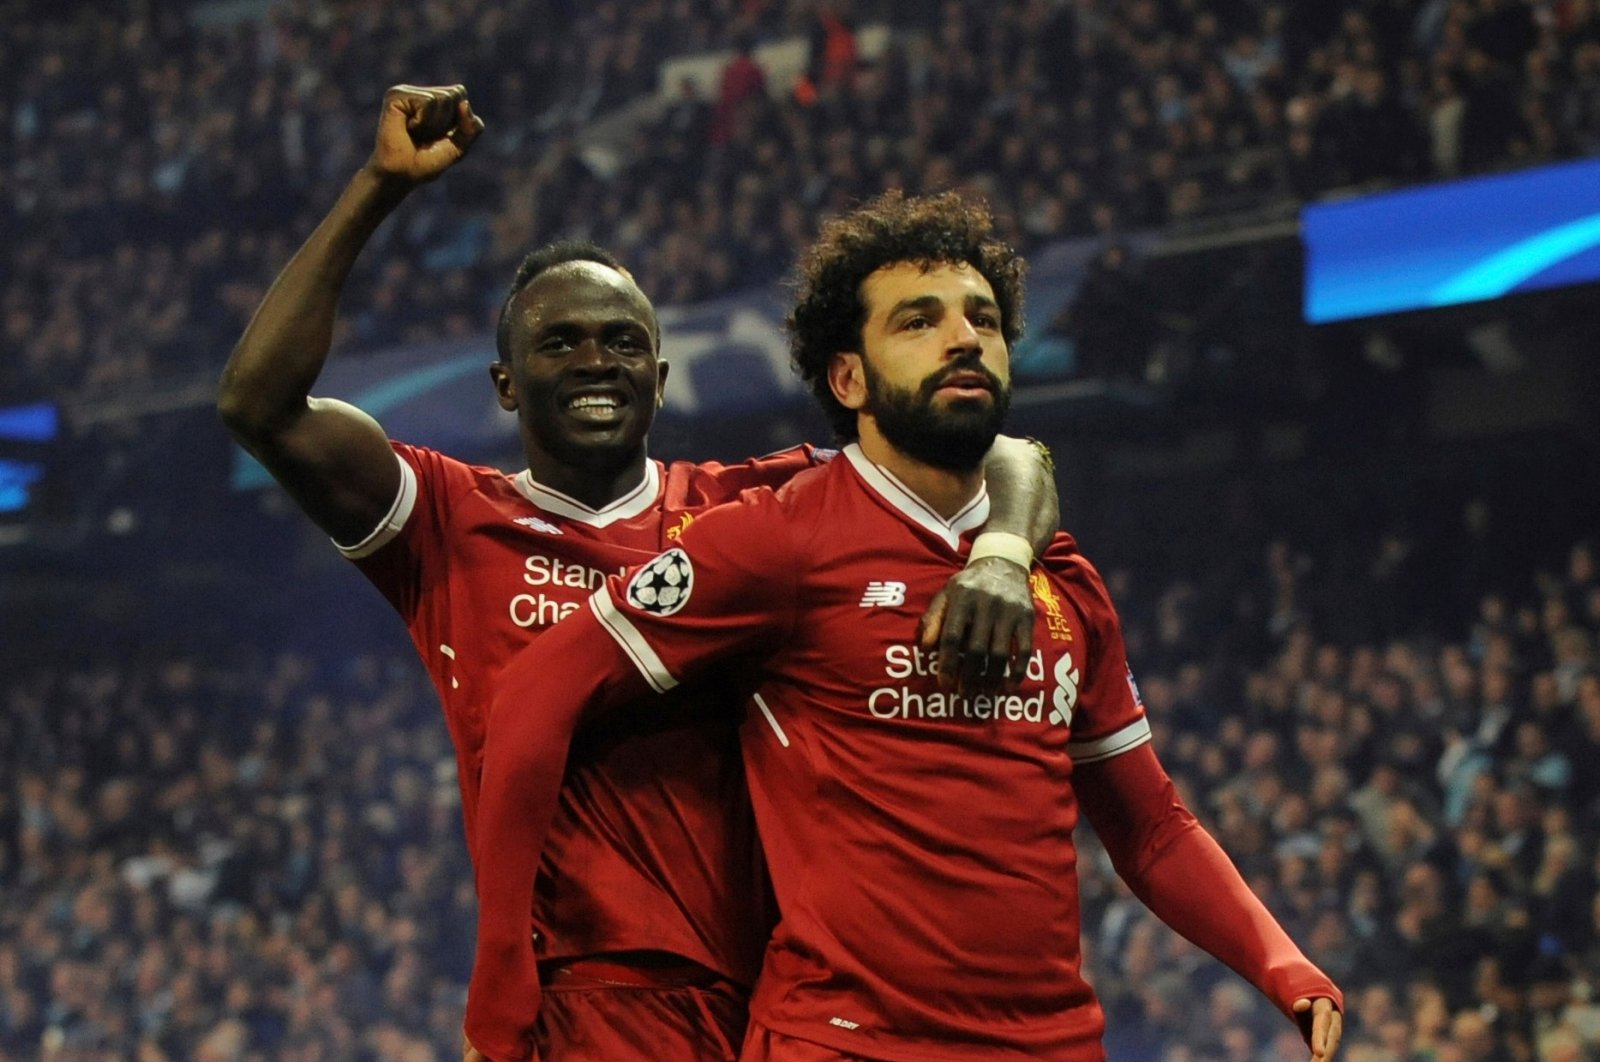 Liverpool&#039;s Mohamed Salah (R) celebrates with teammate Sadio Mane after scoring in a Champions League quarterfinal match against Man City, Manchester, England, April 10, 2018. (AP Photo)